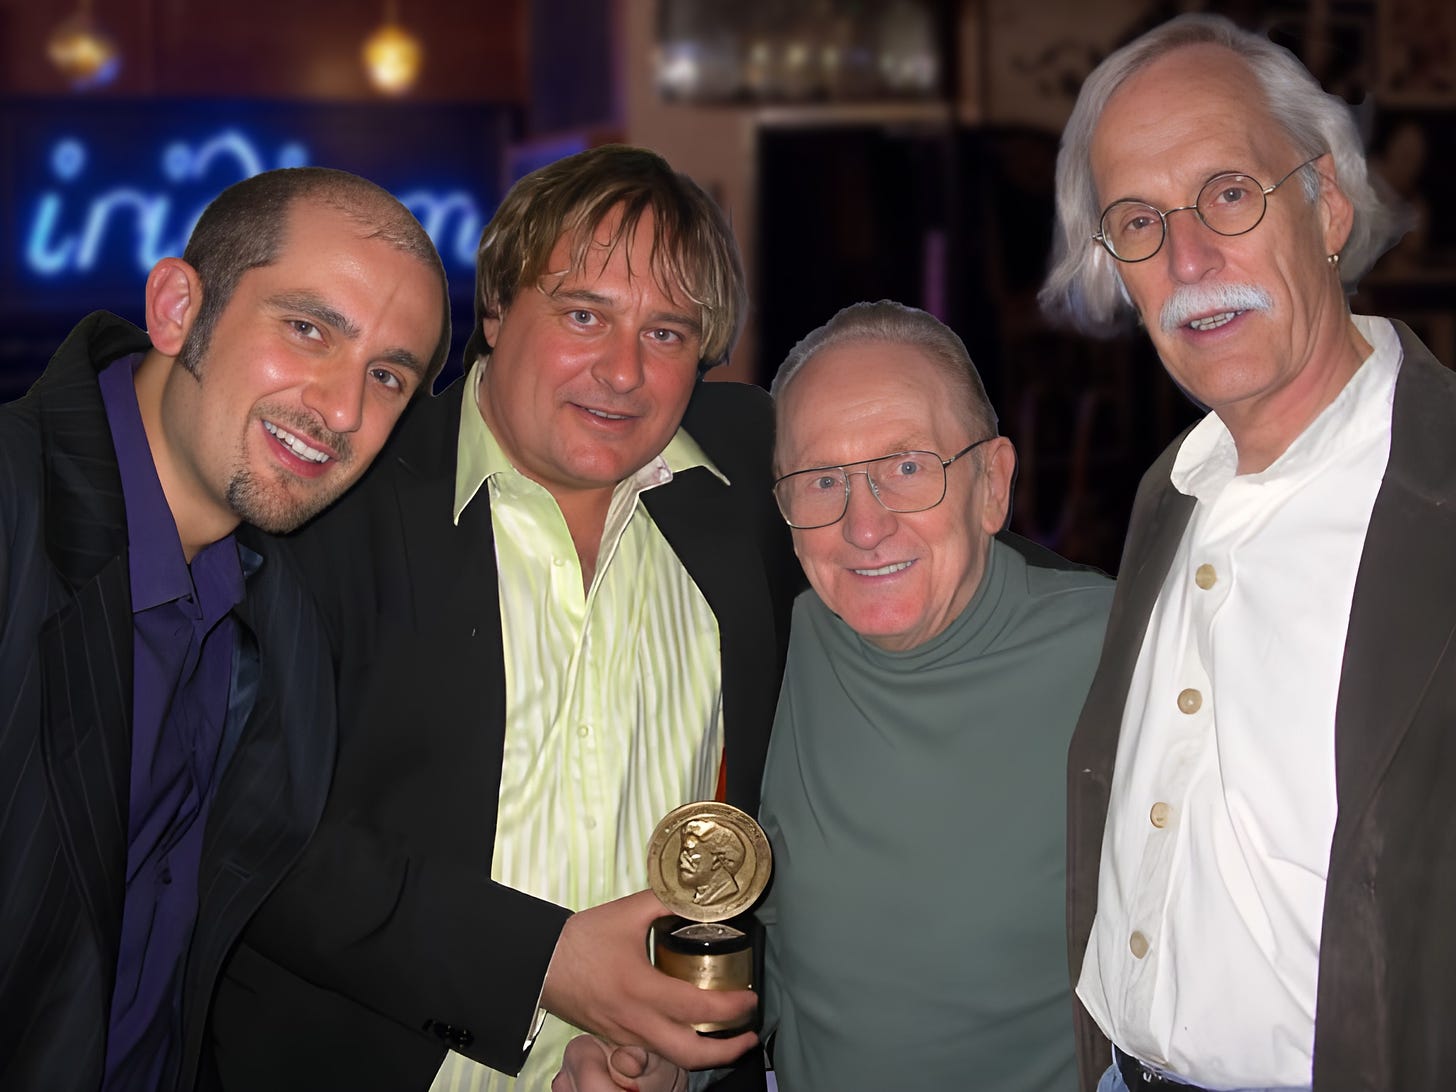 Paolo Pietropaolo, Jowi Taylor, Les Paul and Chris Brookes backstage at the Iridium Club in NYC, Jowi and Les holding the Peabody Award